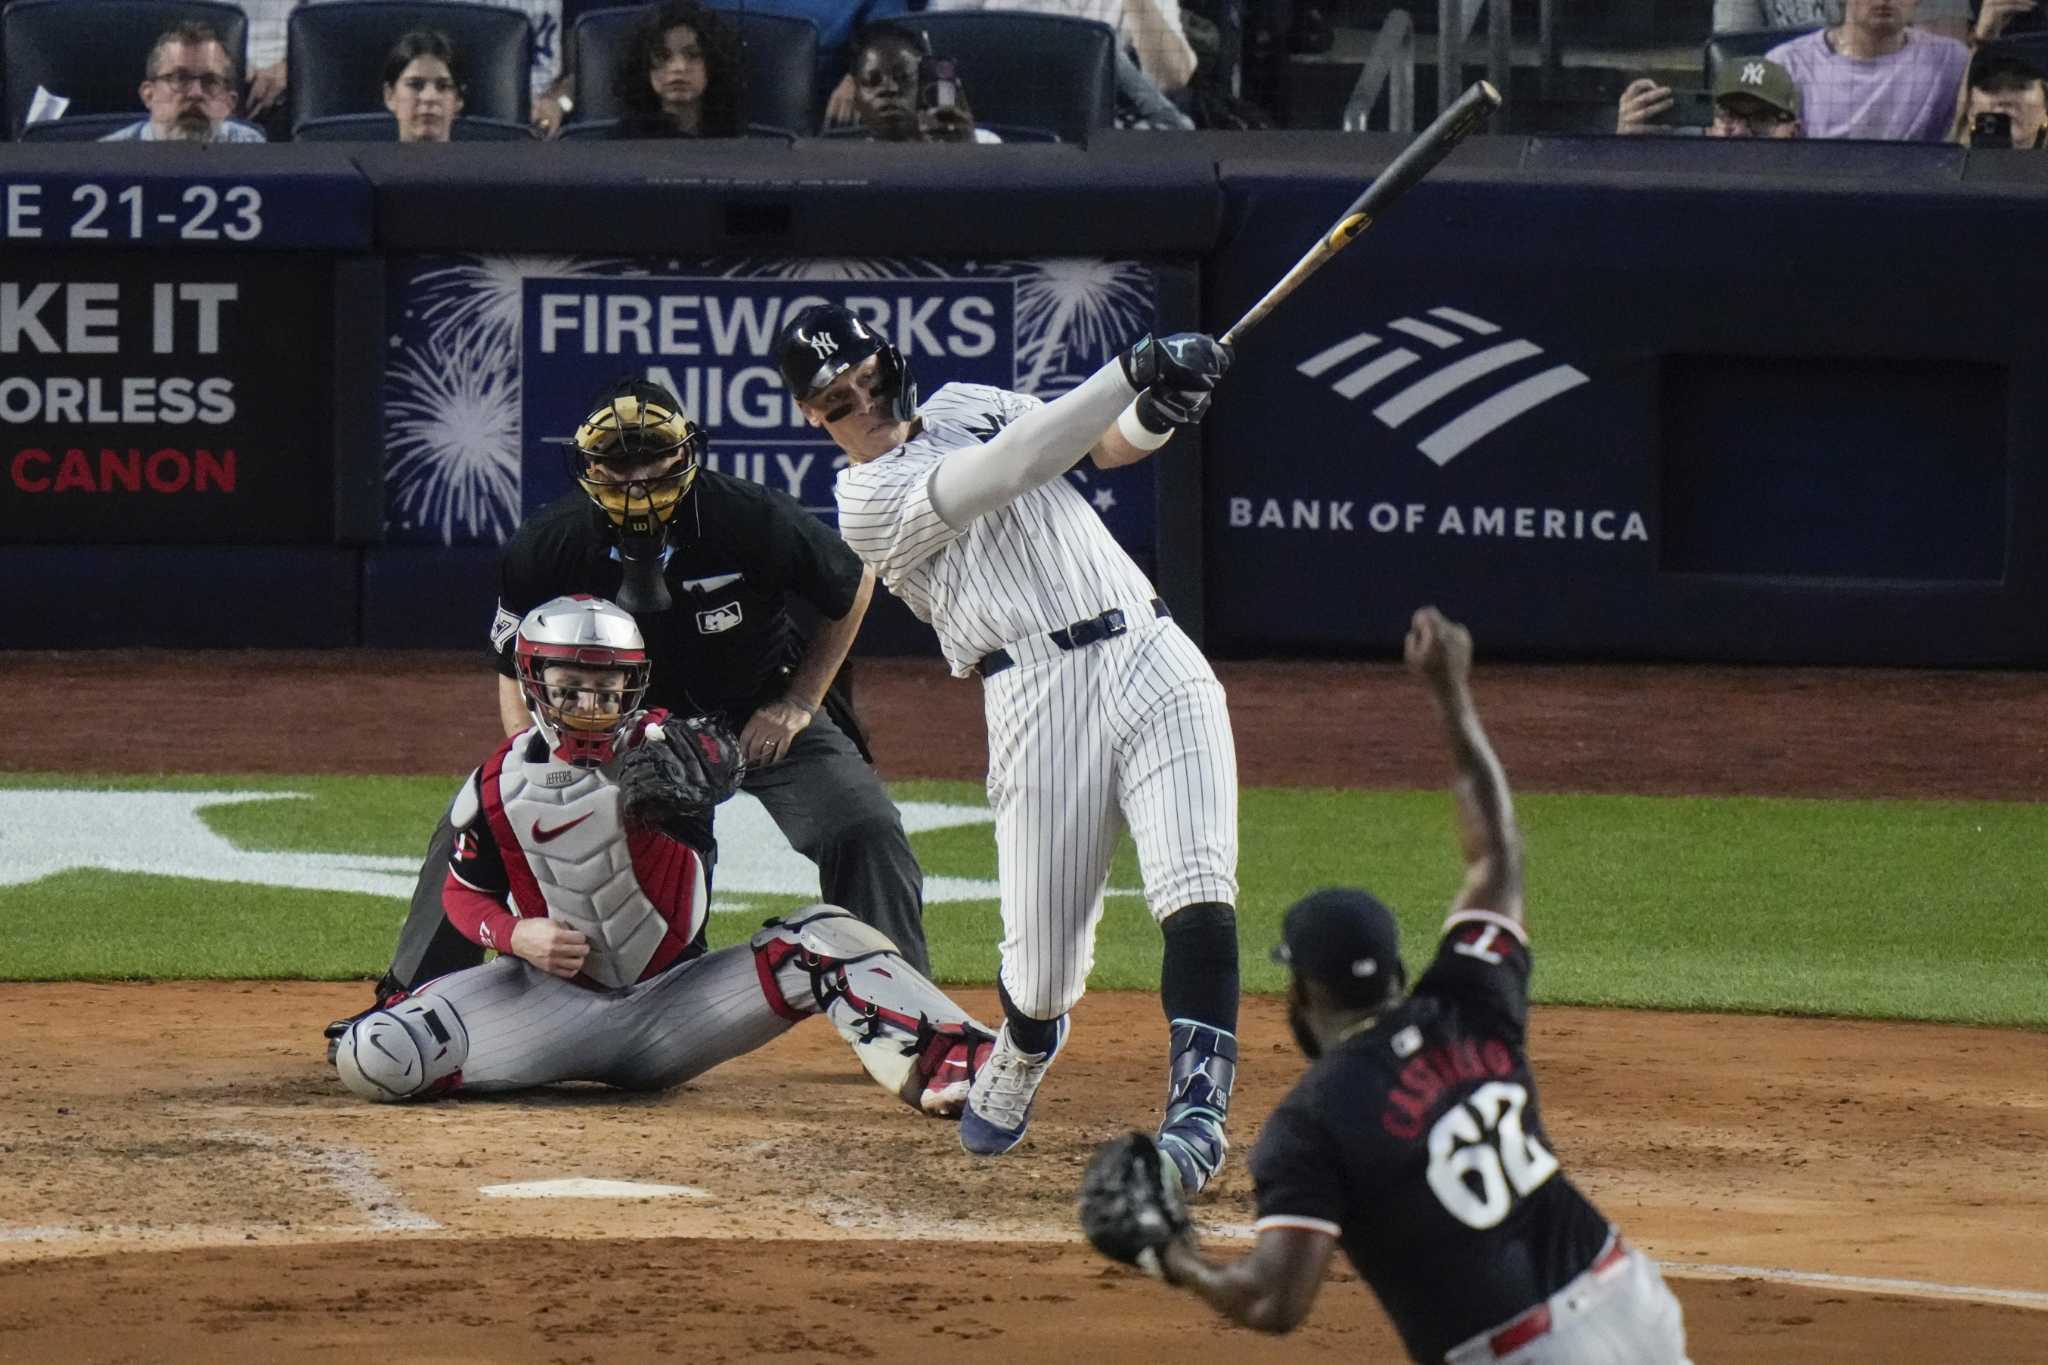 Aaron Judge's 5 RBIs lead Yankees over Twins 9-5 for 7th straight win and 18th in 22 games